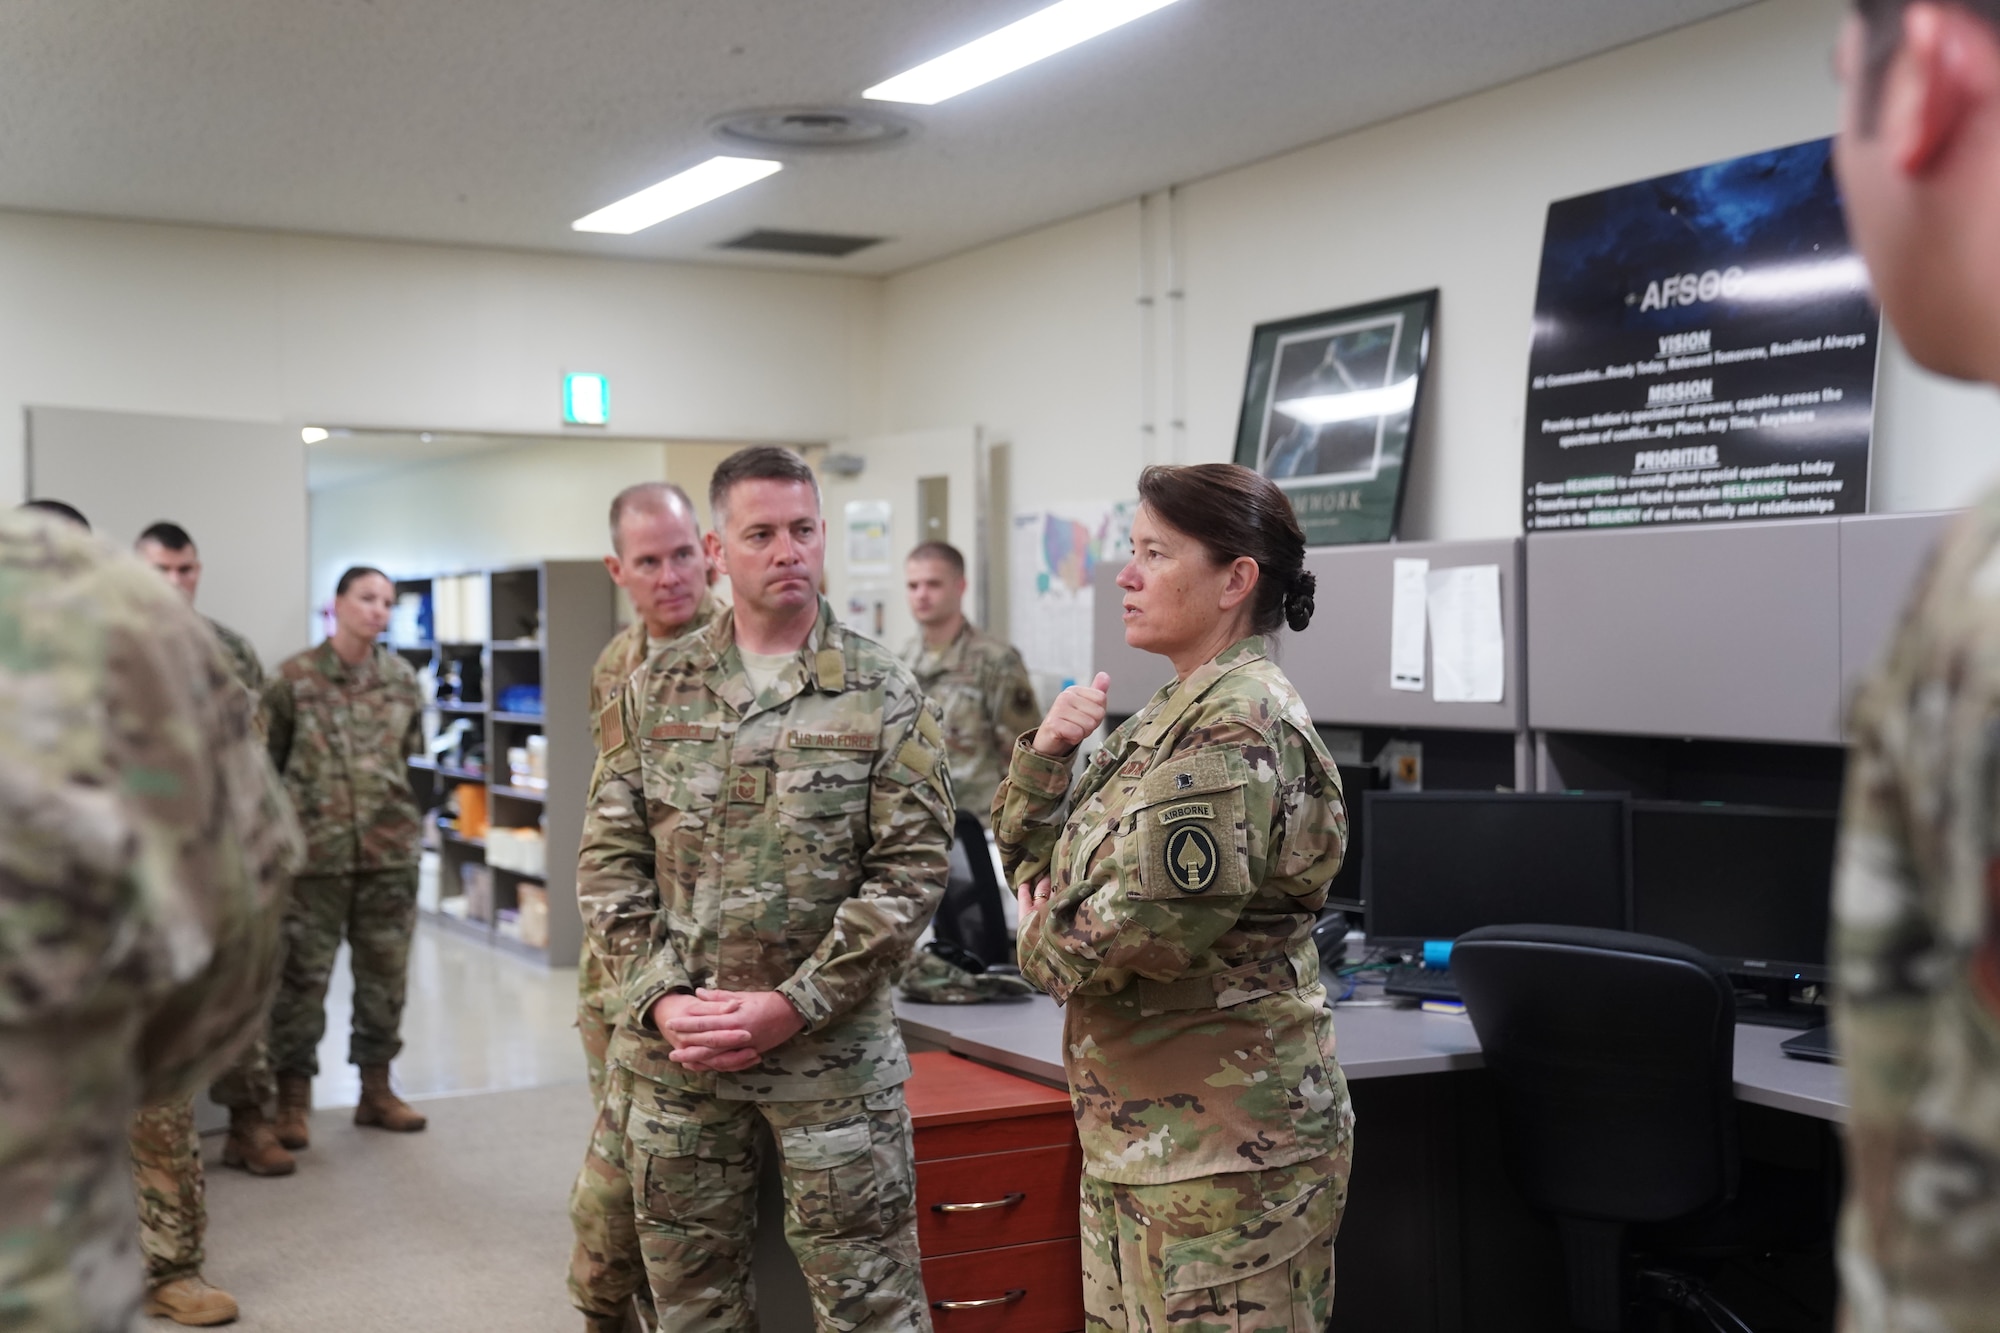 Brig. Gen. Brenda Cartier, Air Force Special Operations Command director of operations, and Chief Master Sgt. Christian Hendrick AFSOC operations chief enlisted member, visited the 353rd SOG as part of an INDOPACOM immersion visit.